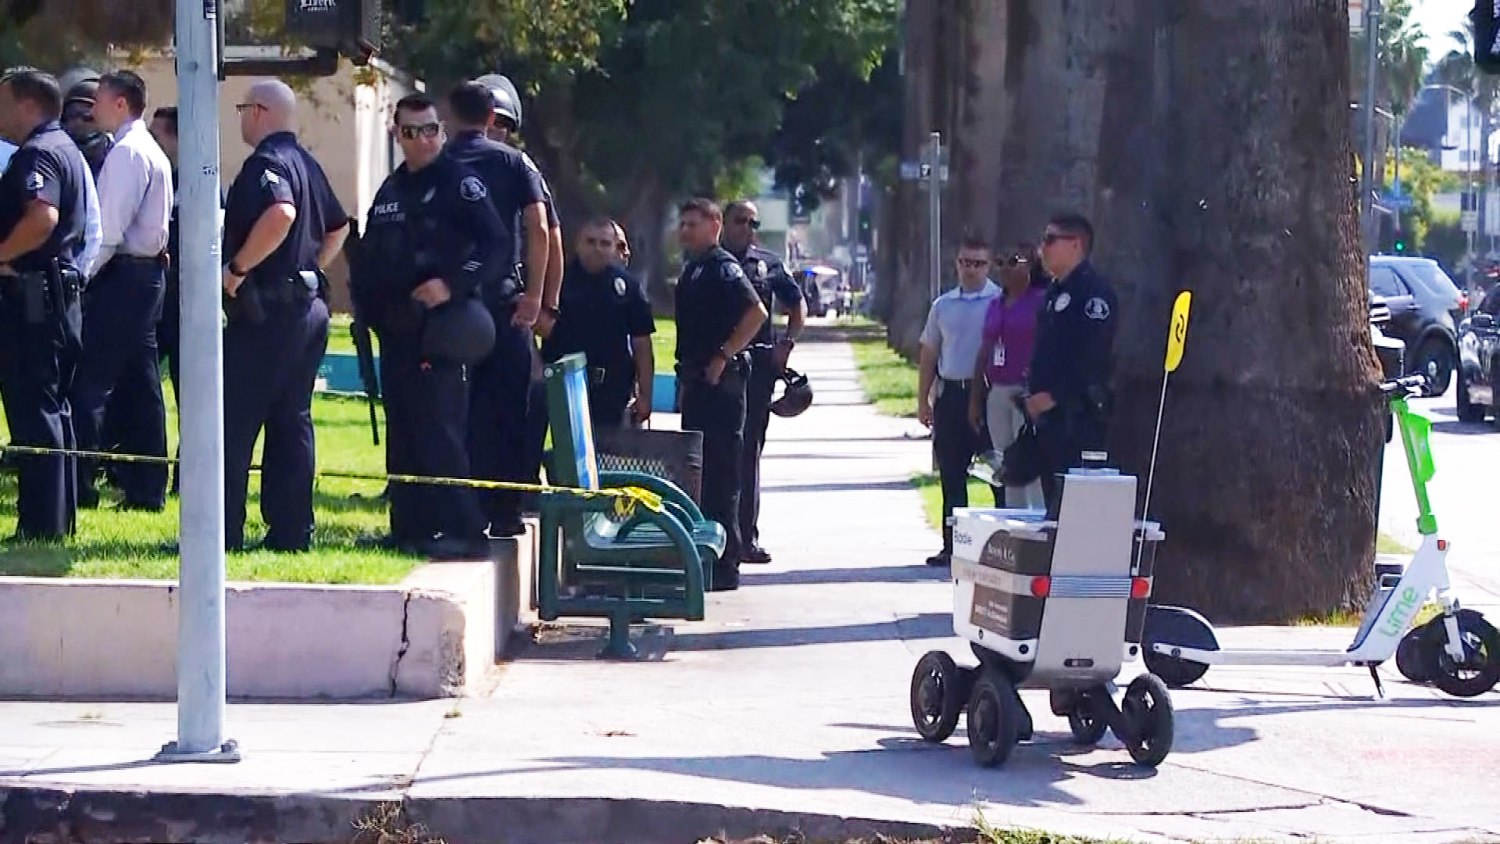 Food Delivery Robot through Crime Scene in Viral Video